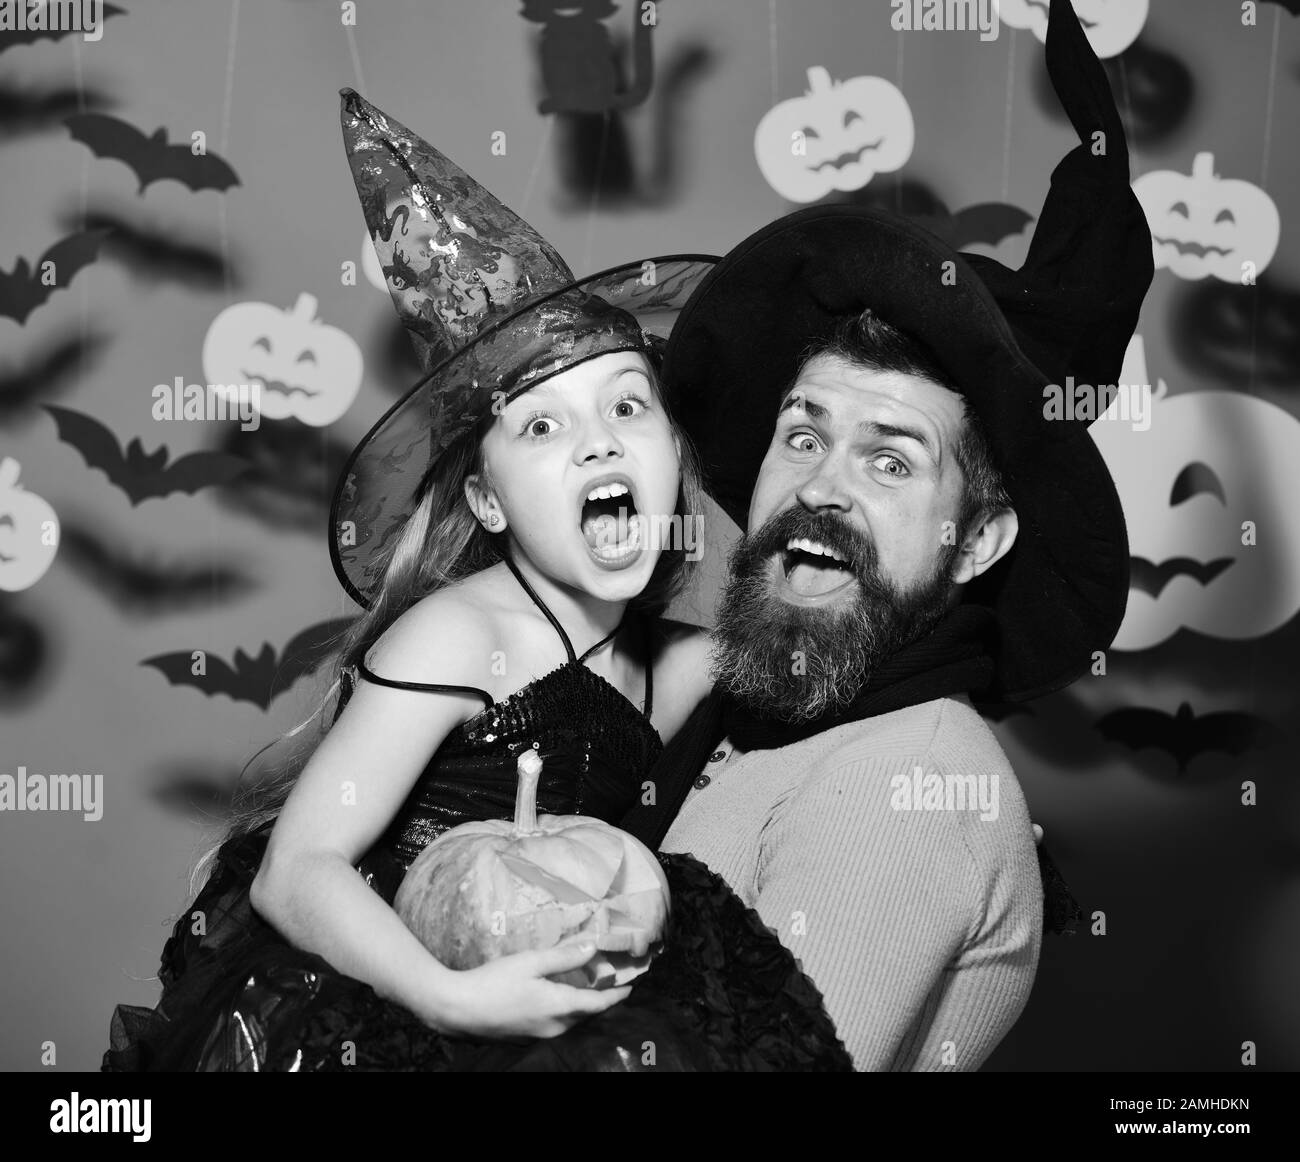 Wizard and little witch in black hats hold pumpkin. Father and daughter in costumes. Girl and bearded man with screaming faces on red background with spooky symbols. Halloween party and decor concept Stock Photo